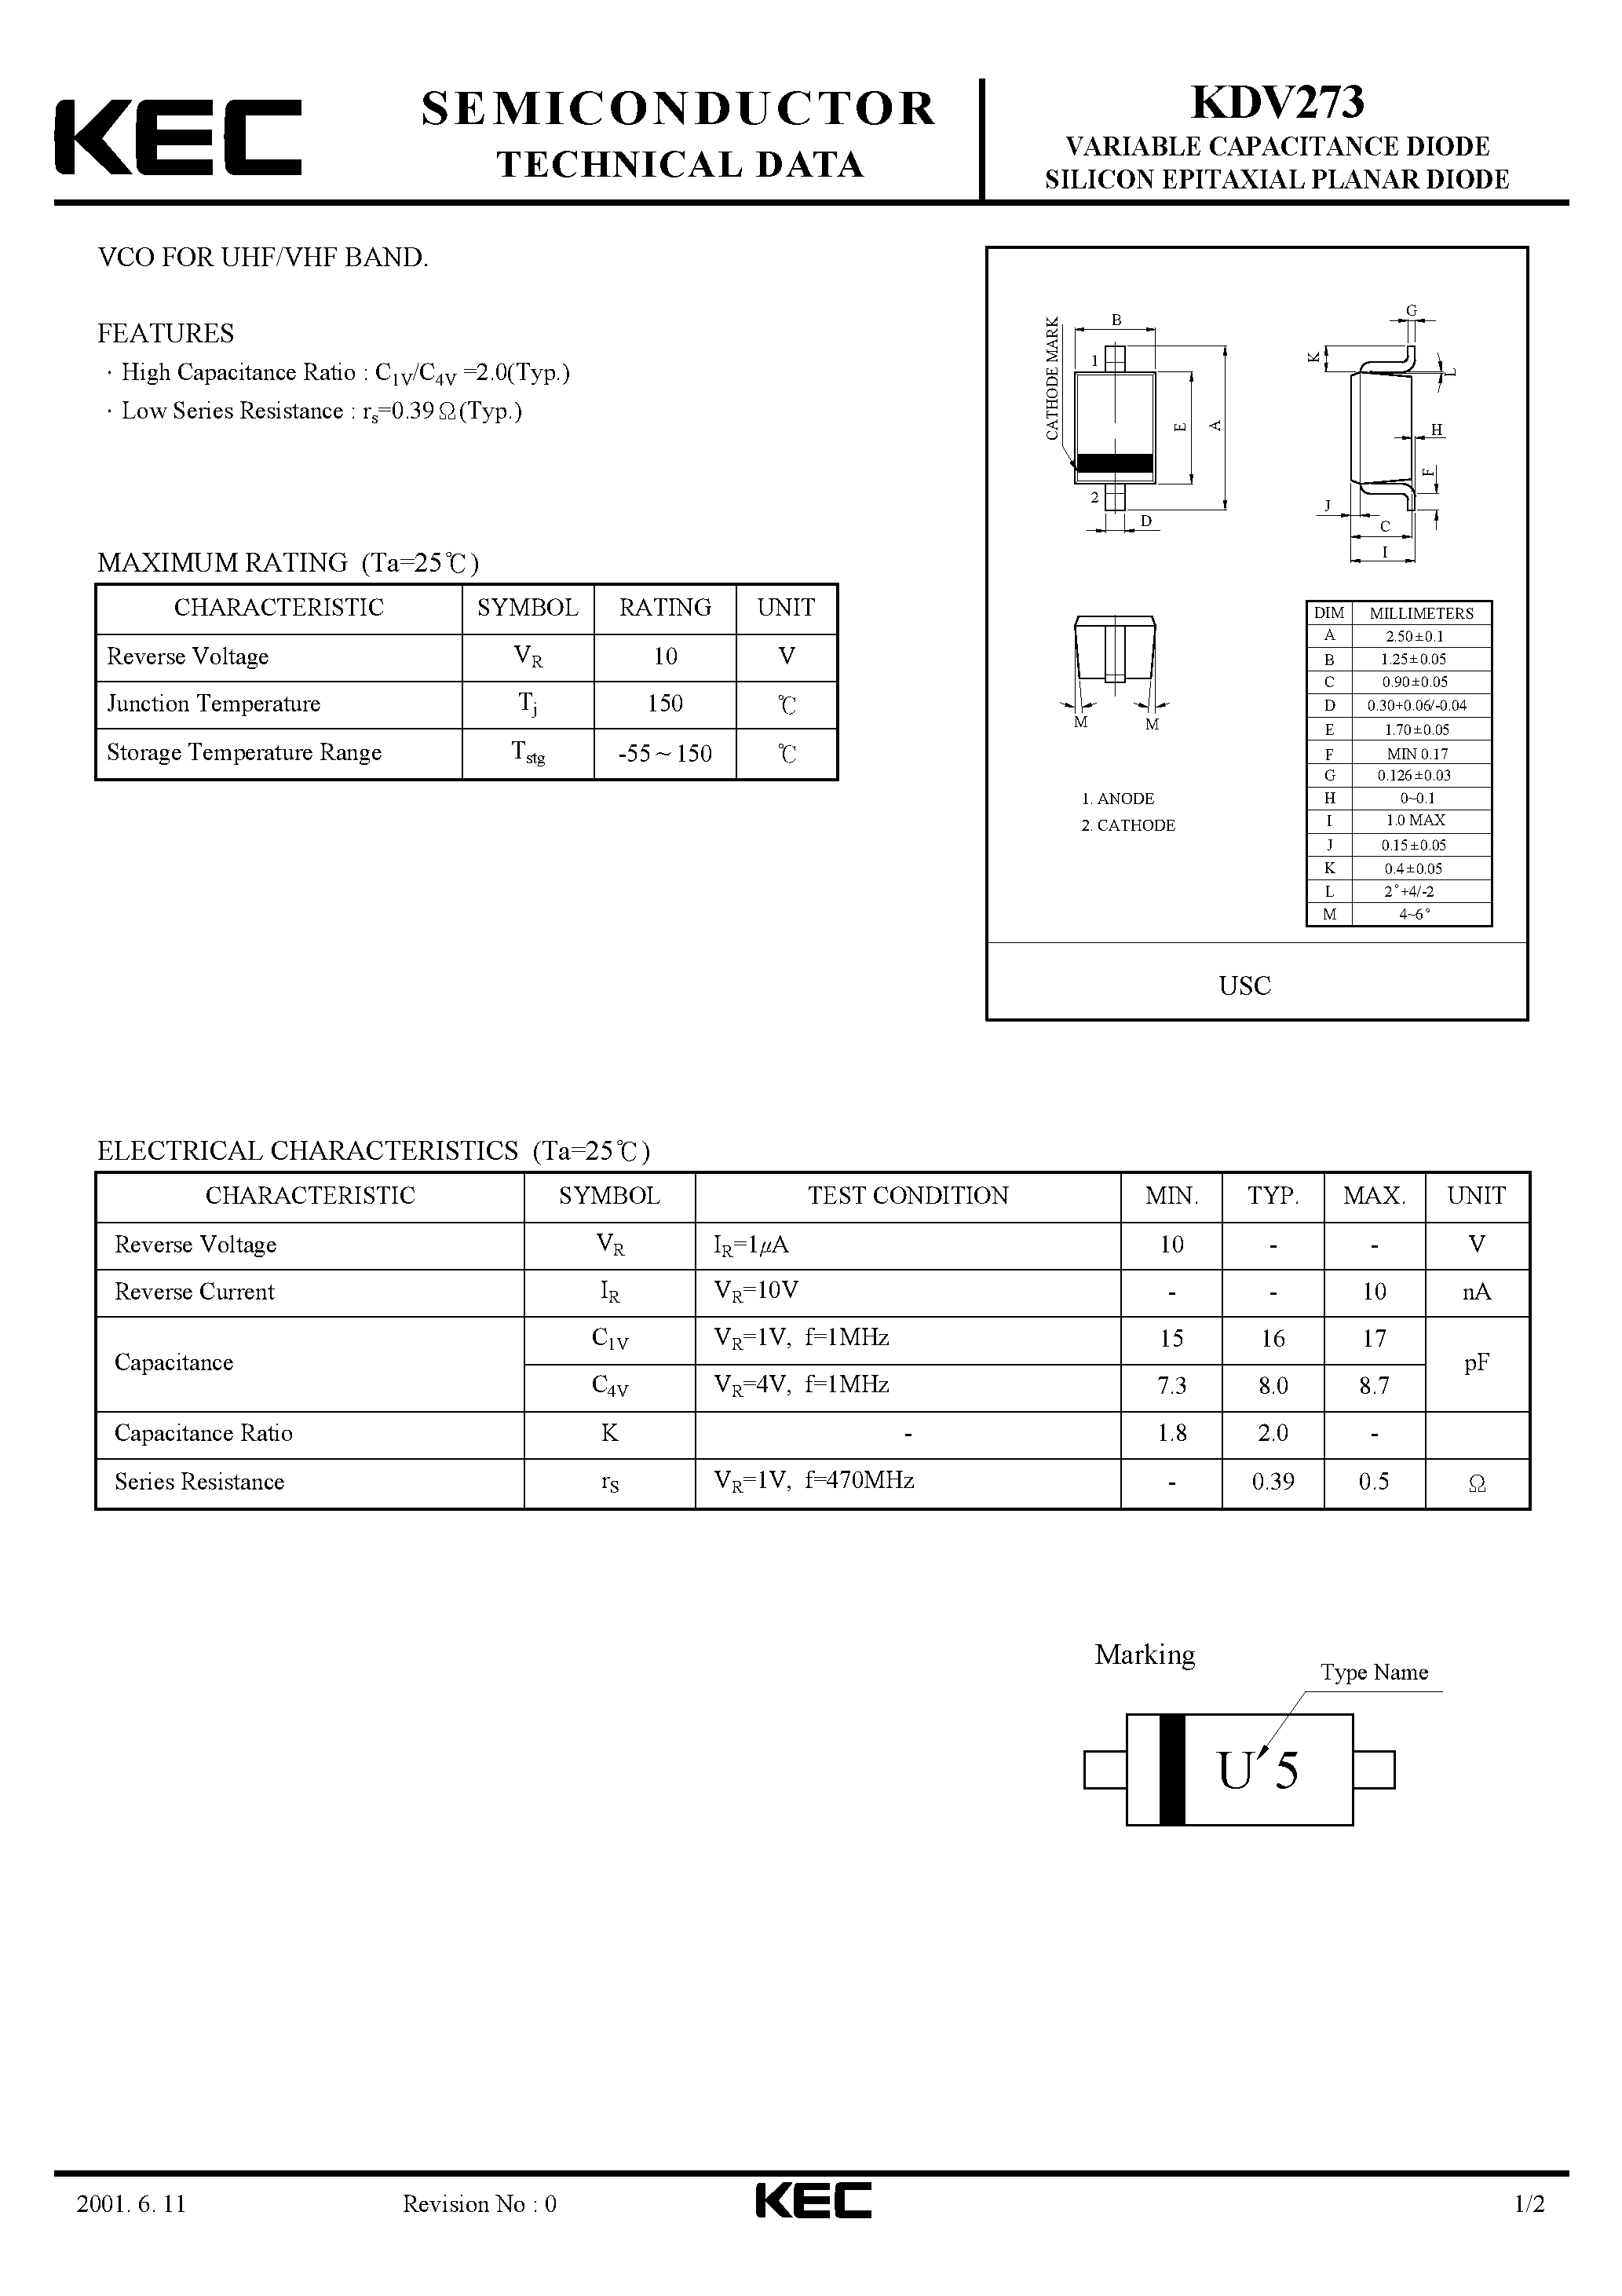 Datasheet KDV273 - VARIABLE CAPACITANCE DIODE SILICON EPITAXIAL PLANAR DIODE(VCO FOR UHF/VHF BAND) page 1